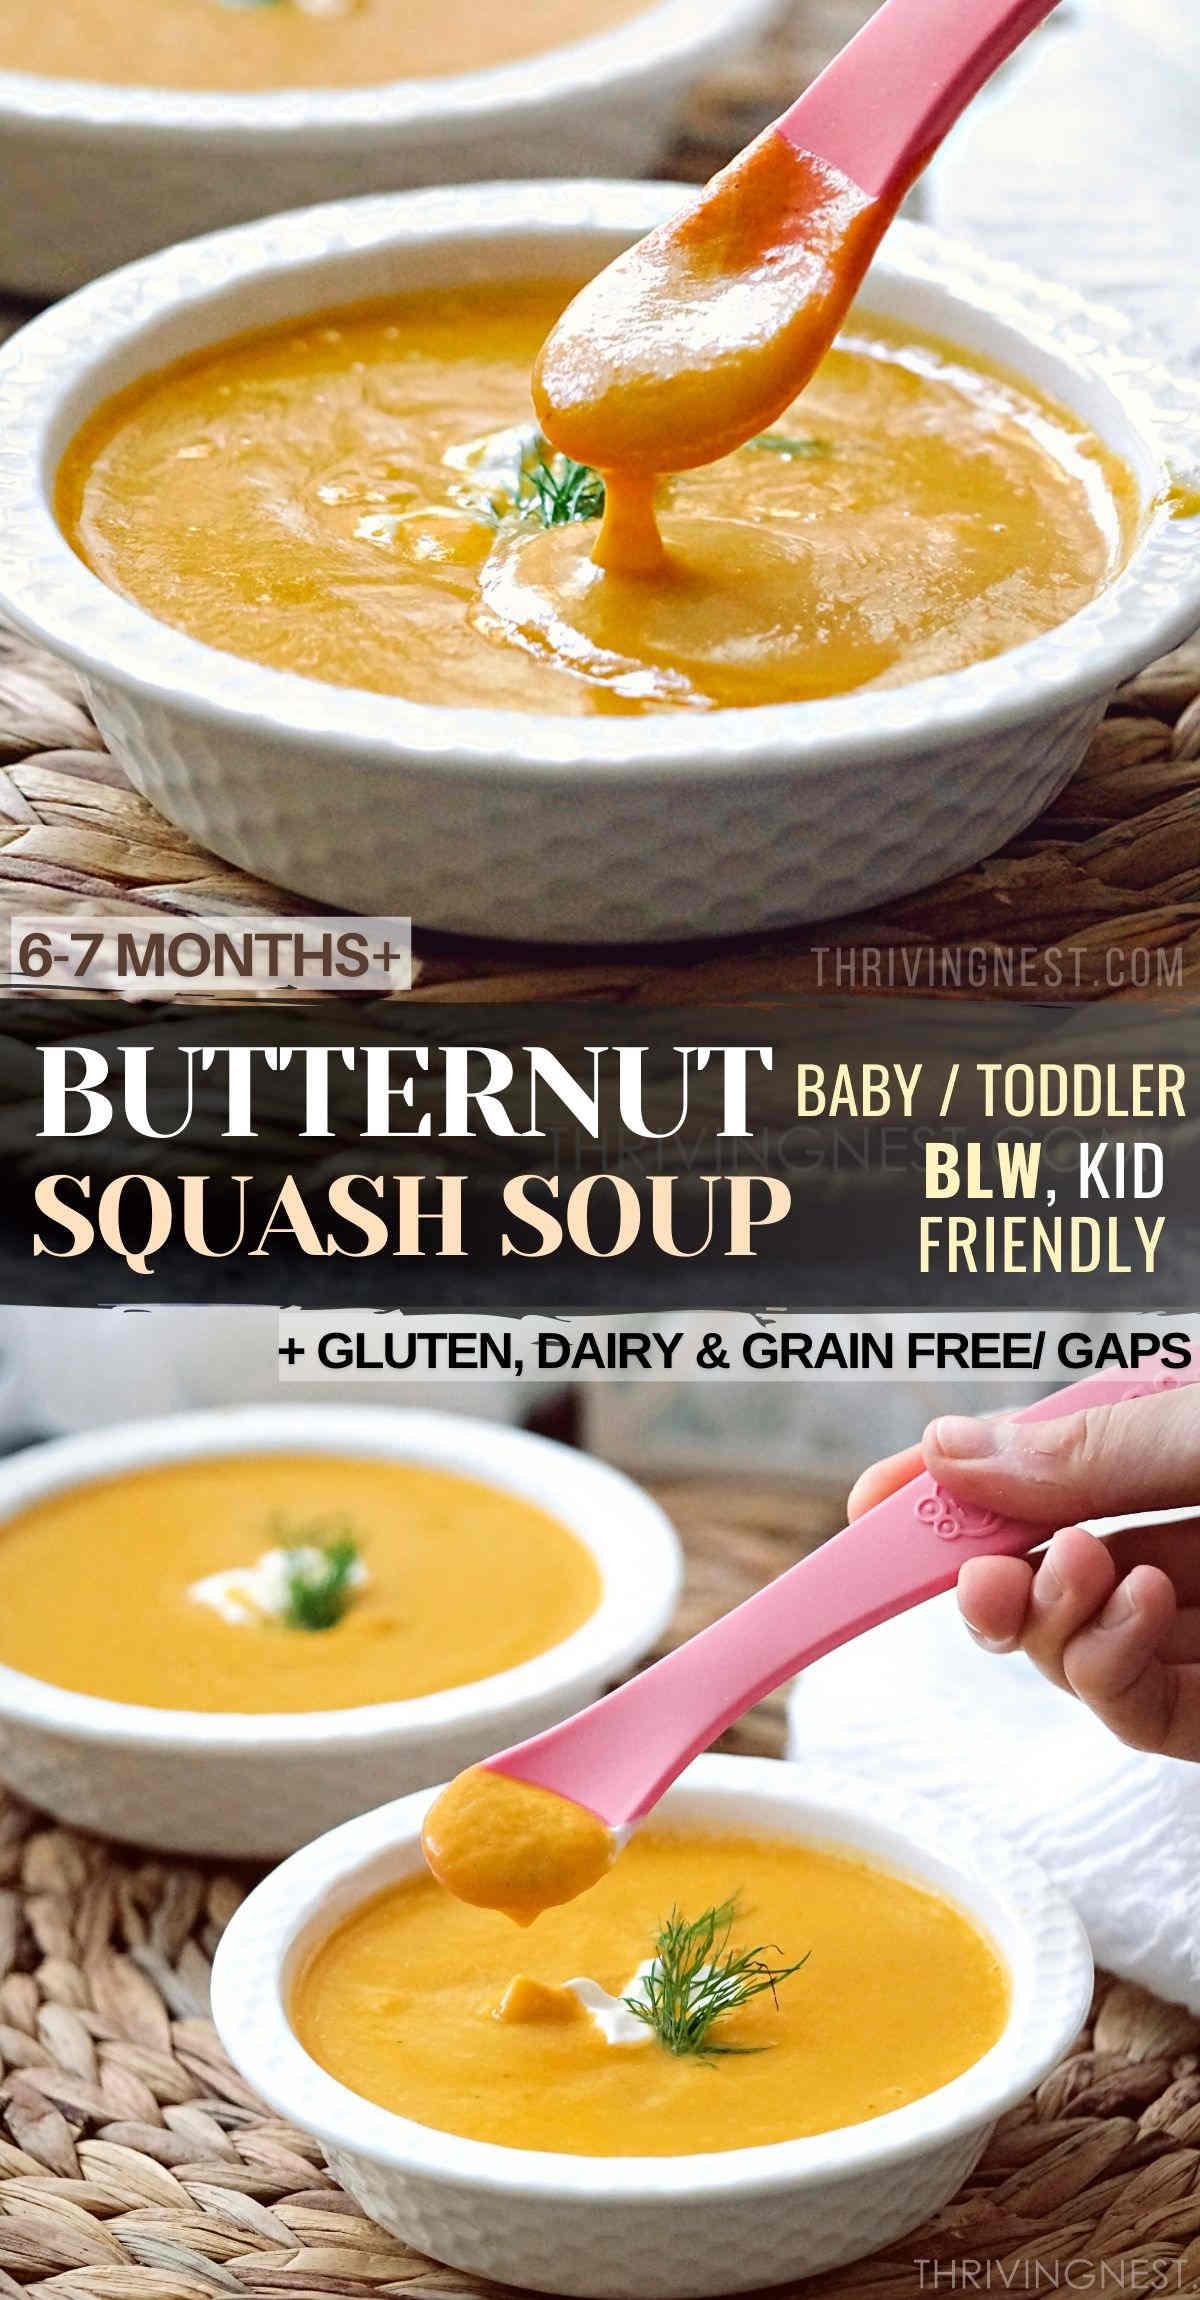 Butternut squash soup for babies (6-7 month+) toddlers, and older kids – gluten, dairy and grain free + GAPS friendly and nutritious. This butternut squash soup is one of the easiest ways to include squashes in a baby's diet, including toddlers and older kids. Whether you’re doing baby led weaning or not, this is a delicious way to prepare butternut squash for babies. #butternutsquashsoup #soupforbaby #babyledweaning #butternutsquashforbaby #babysouprecipes #toddlersouprecipes #kidssouprecipes 